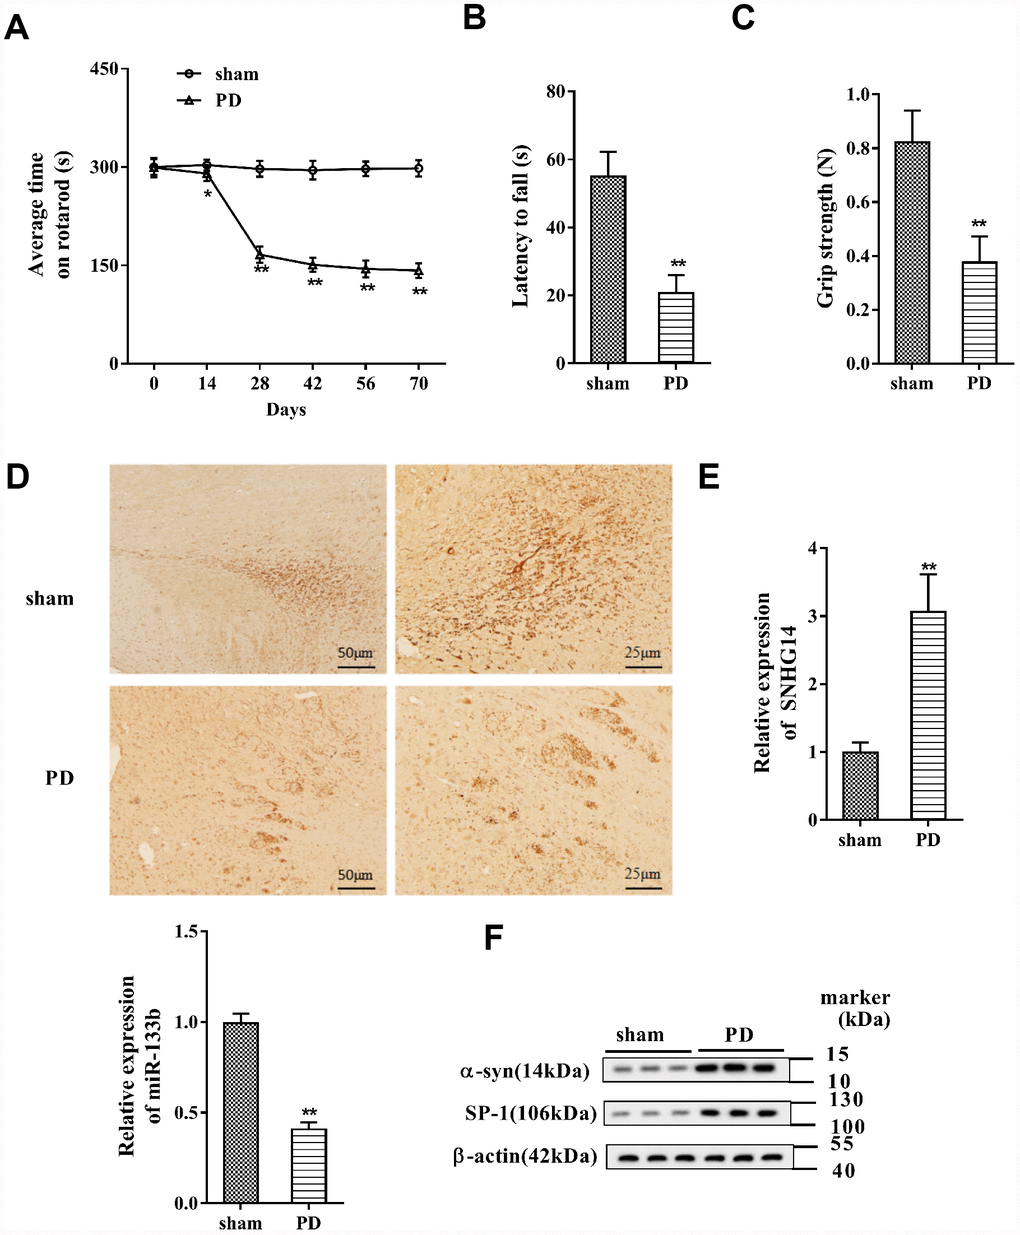 SNHG14 expression was increased in PD mouse model. PD mouse models (n=7) were constructed, with the sham group (n=7) served as control. The motor function of PD mice was assessed with (A) rotarod performance, (B) reversed screen test, and (C) forelimb grip strength test. (D) Immunohistochemistry staining was performed to determine the number of Tyrosine Hydroxylase (TH)-positive DA neuron in the brain tissues of mice. (E) Relative expression of SNHG14 and miR-133b in brain tissues of mice was quantified by qRT-PCR. (F) Protein level of α-syn and SP-1 in brain tissues of mice was analyzed with western blotting. *P